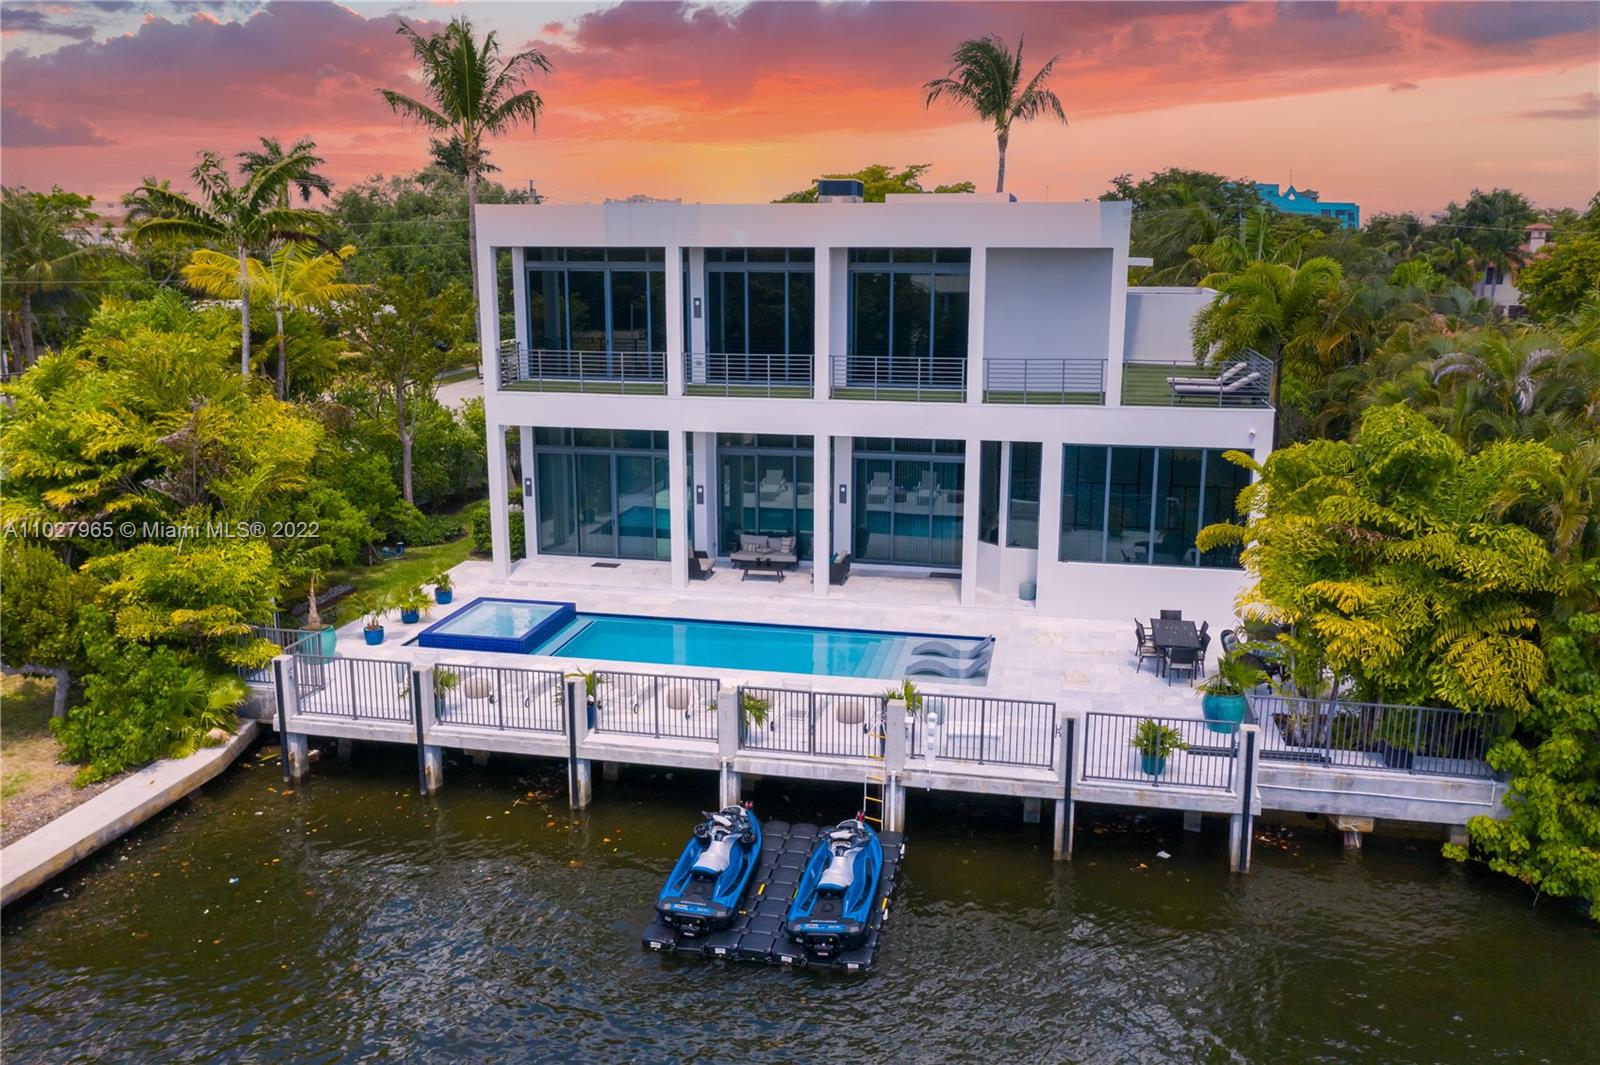 THIS IS AN ULTRA MODERN, CHIC, WATERFRONT HOME, FULLY FURNISHED, FULLY STOCKED WITH TOP OF THE LINE FINISHINGS AND CHEFS KITCHEN. JUST MINUTES AWAY FROM THE BEACH, BEACH PLACE AND AWARD WINNING RESTAURANTS & LAS OLAS. DOCK IS INCLUDED AS WELL. (SHORTER TERMS AVAILABLE... CALL LIST AGENT)